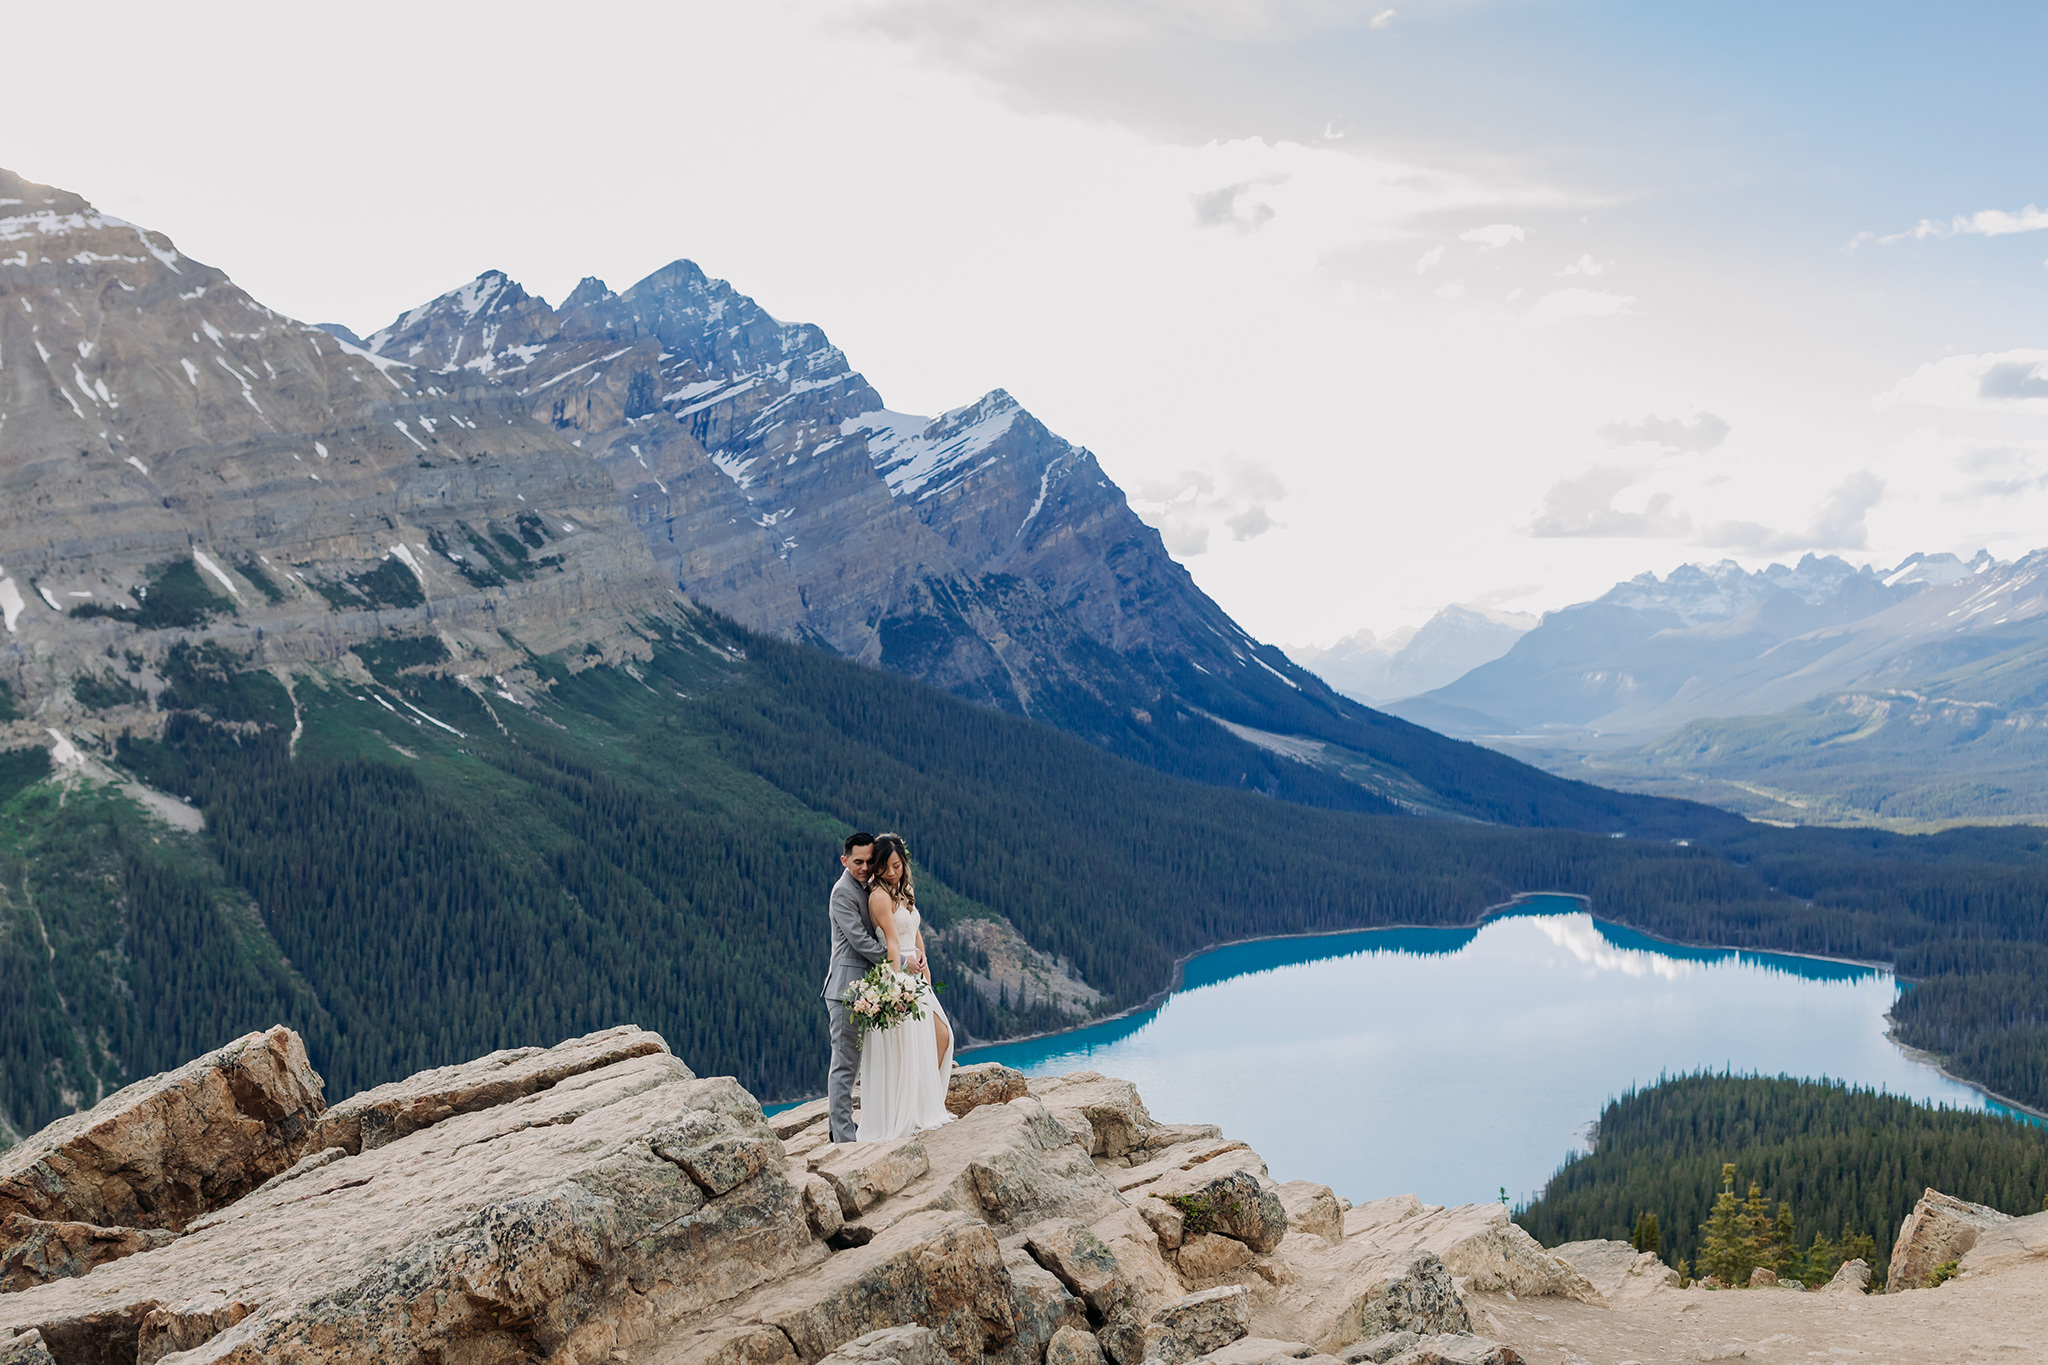 Icefields Parkway elopement Peyto Lake bow summit mountain wedding portraits by Banff intimate wedding photographer ENV Photography